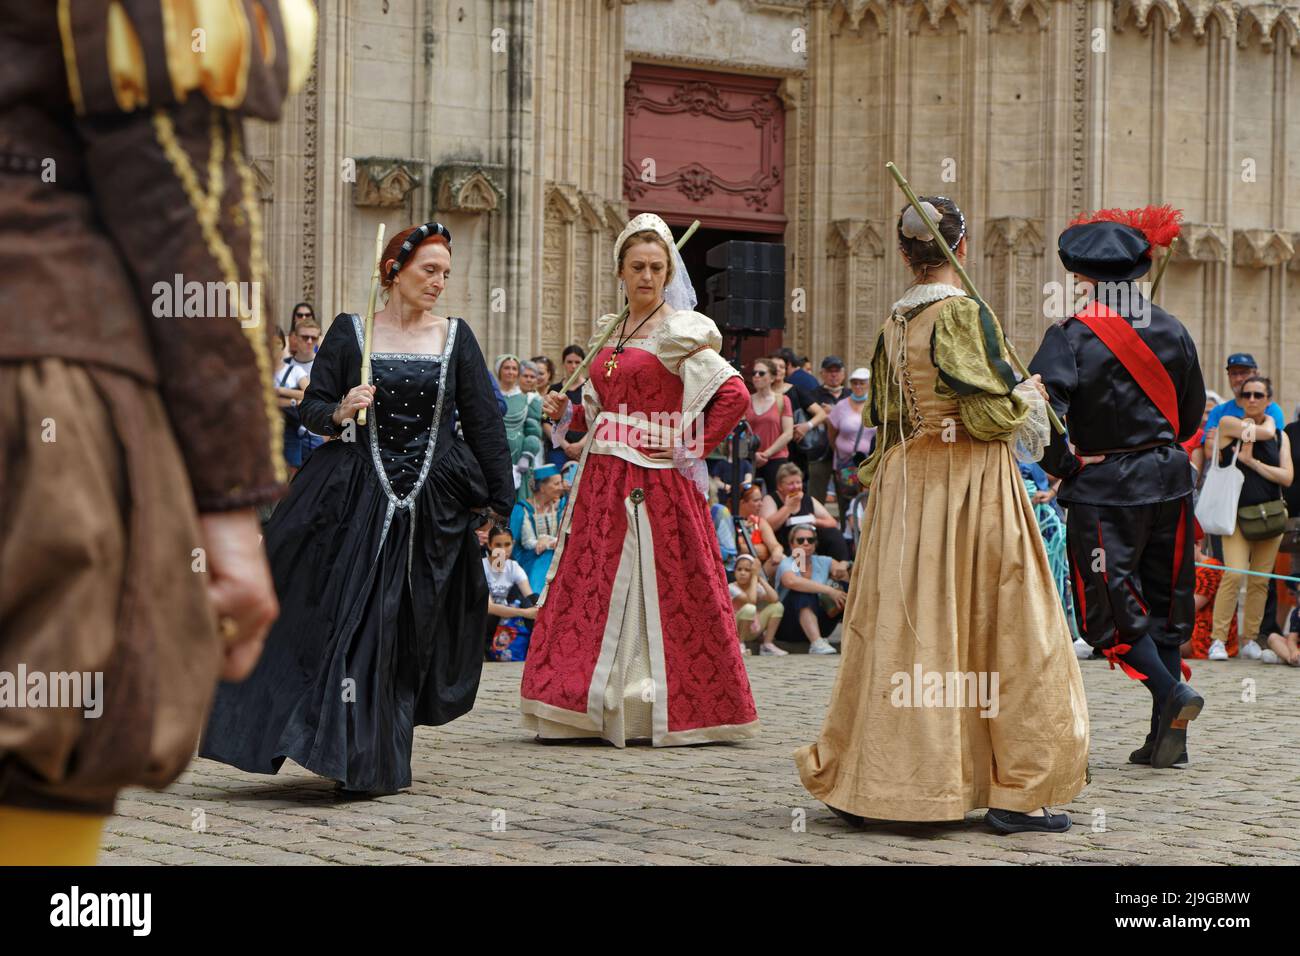 LYON, FRANCE, May 22, 2022 : Shows of sword fights and medieval dances in costumes take place in Vieux-Lyon during the Fete de la Renaissance (Renaiss Stock Photo